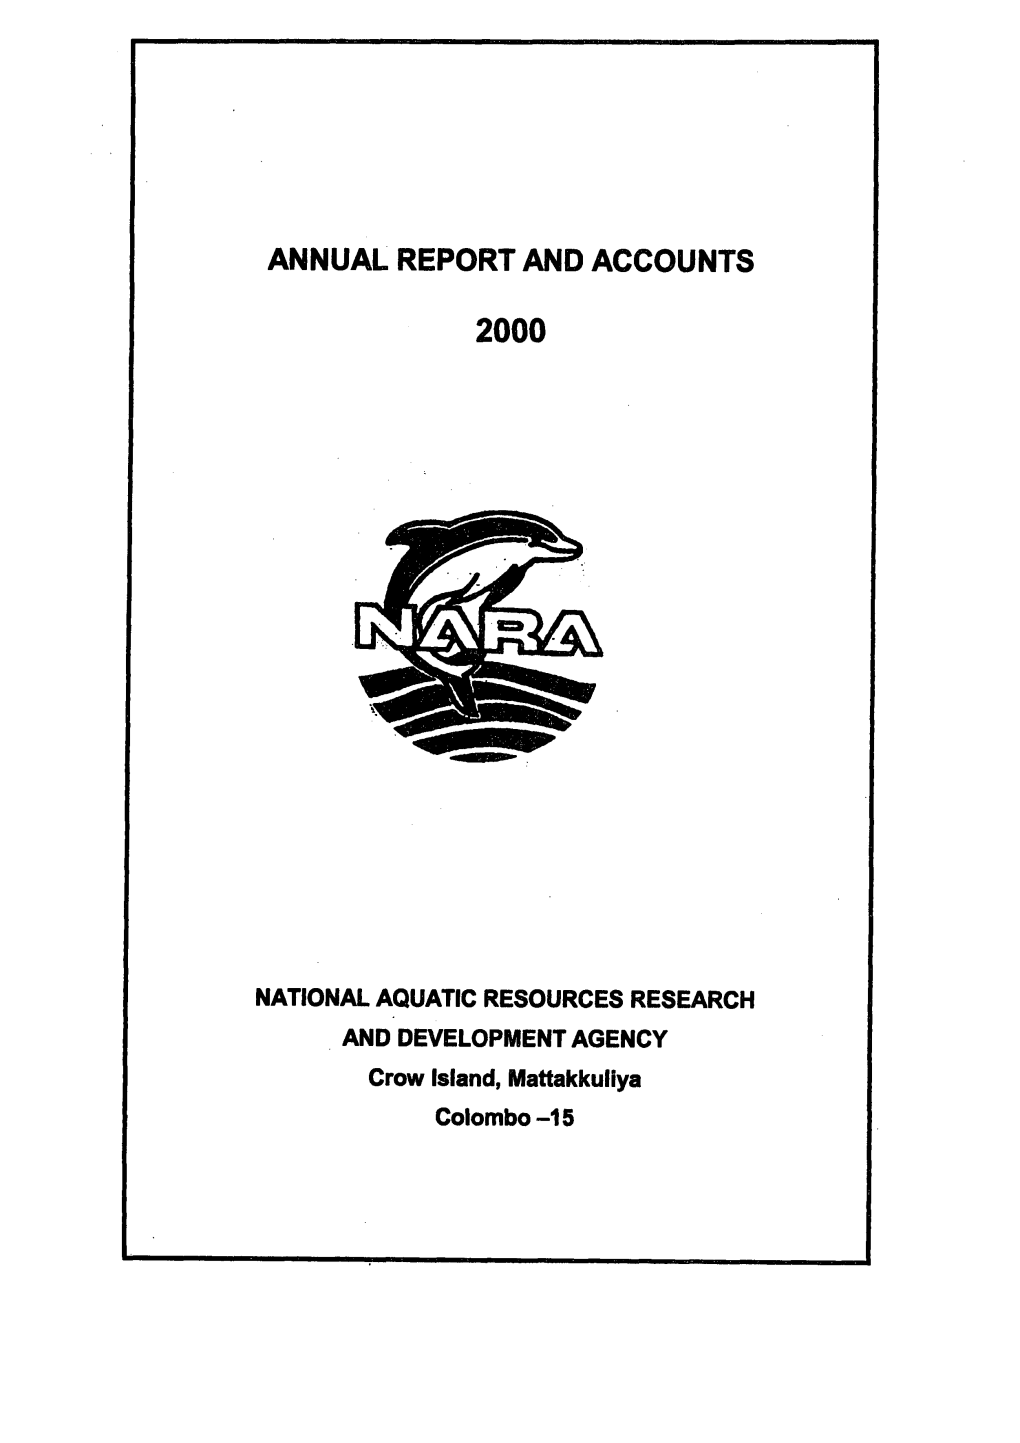 NATIONAL AQUATIC RESOURCES RESEARCH and DEVELOPMENT AGENCY Crow Island, Mattakkuliya Colombo-15 CONTENTS